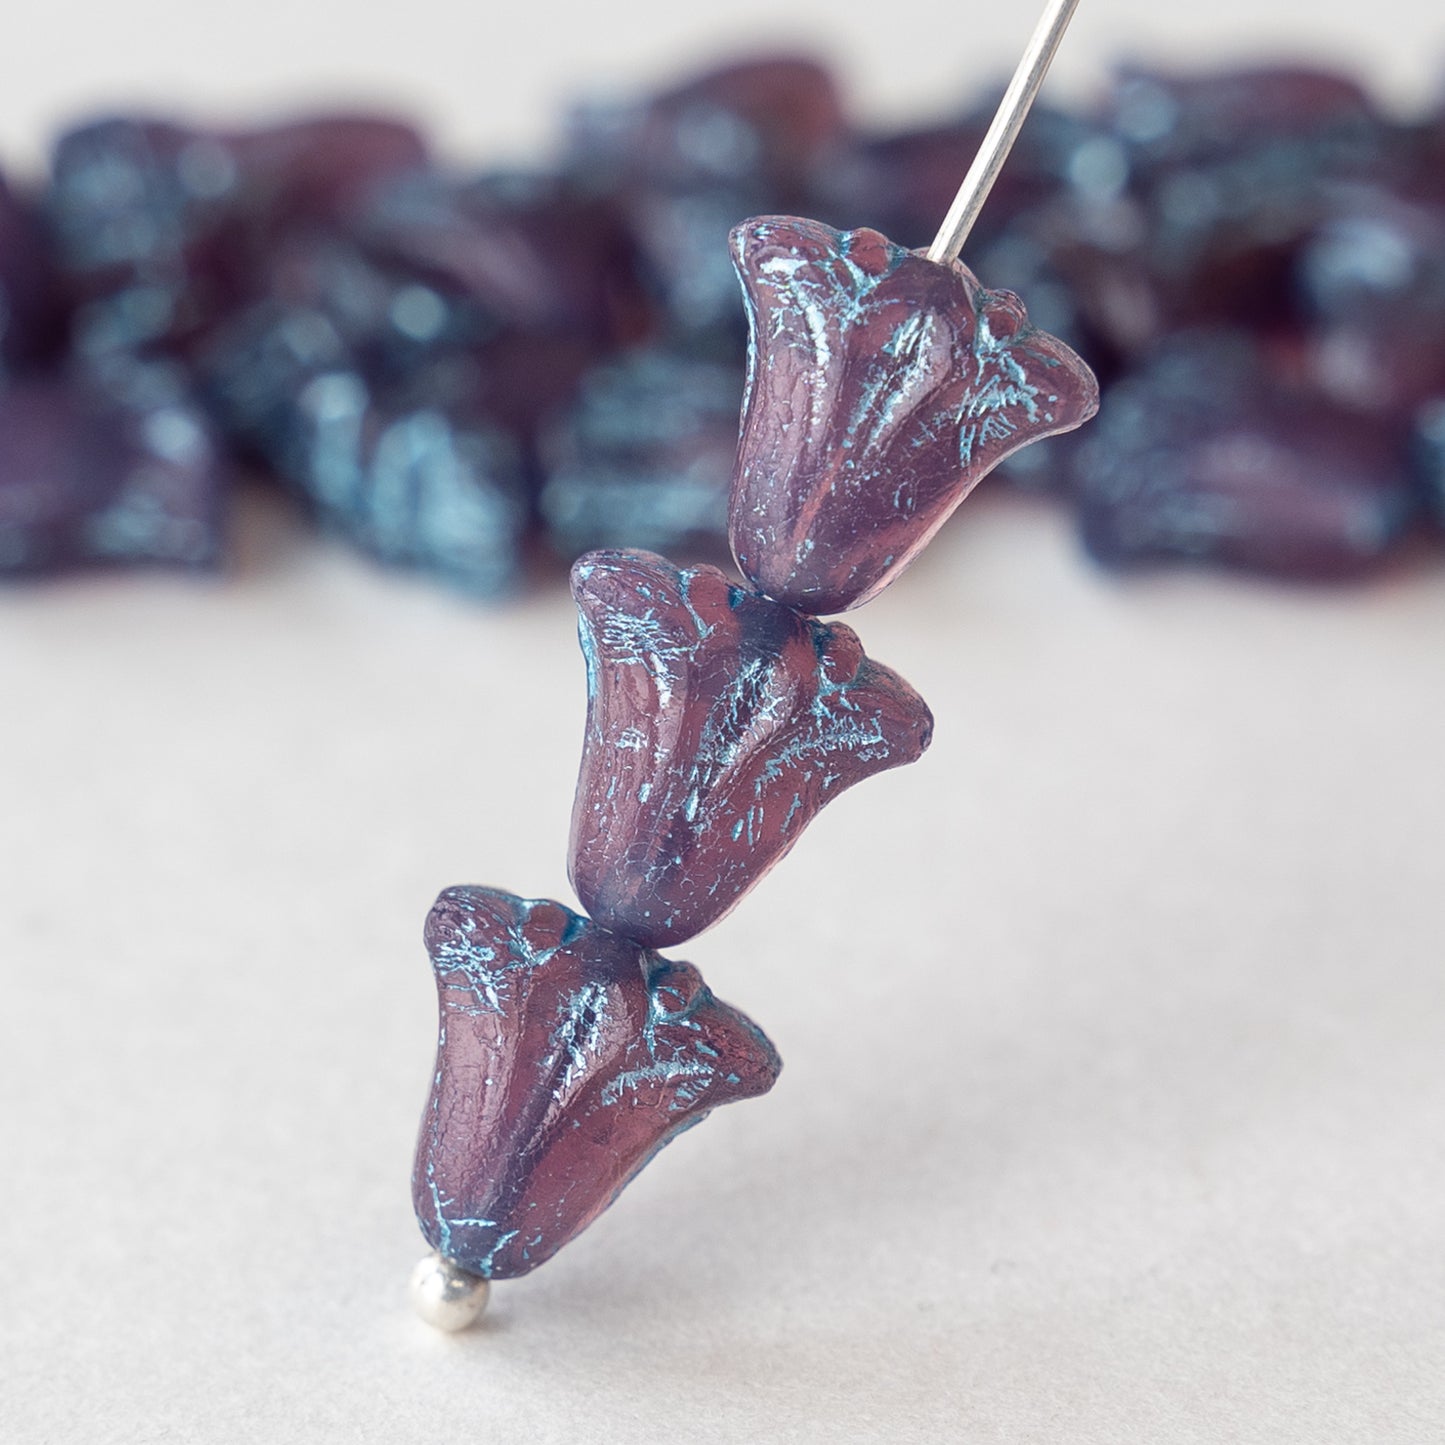 Load image into Gallery viewer, 9x10mm Lily / Tulip Flower Beads - Purple Opaline with Aqua Wash - 15 Beads
